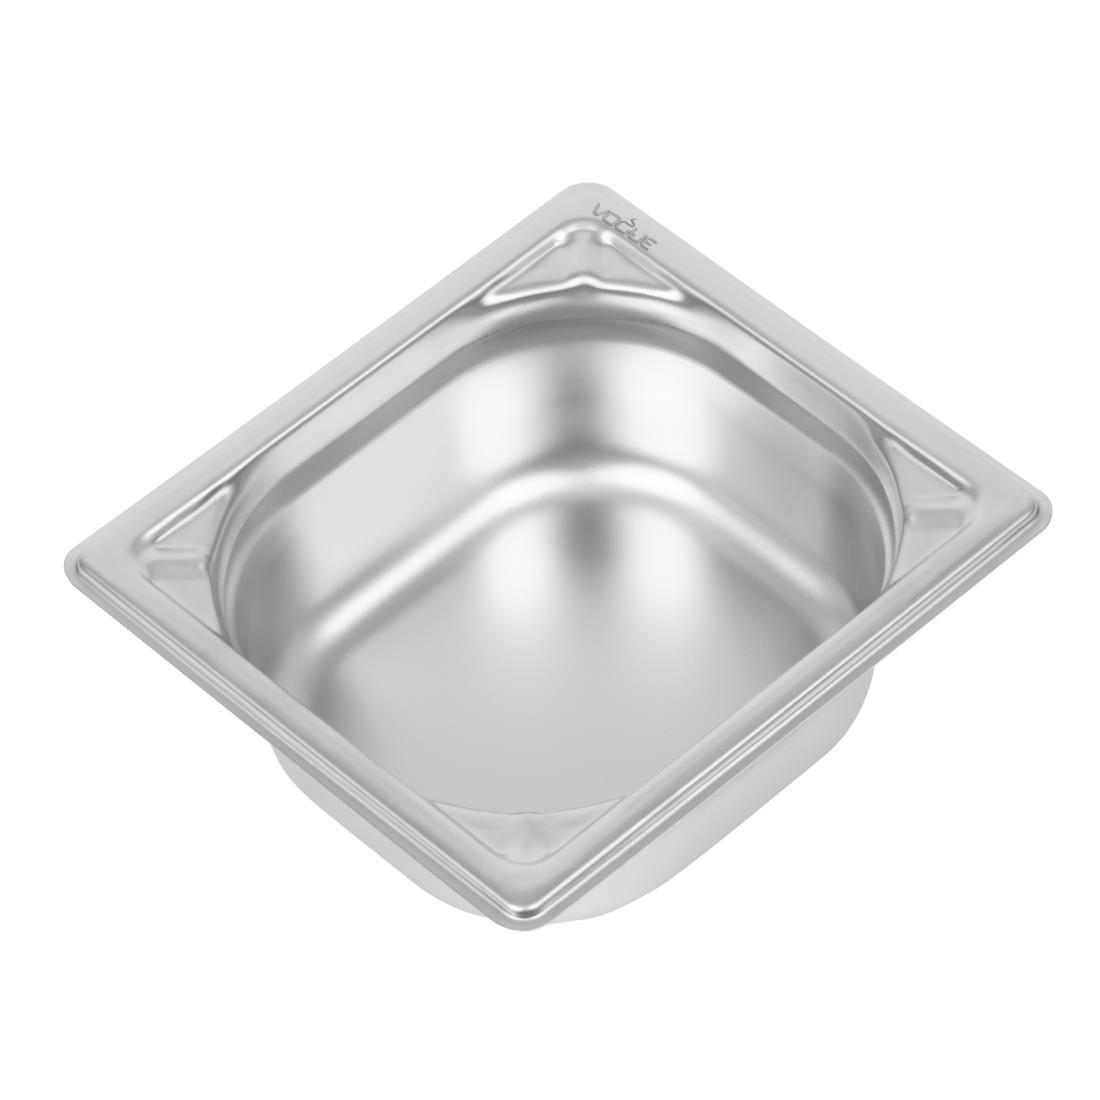 Vogue Heavy Duty Stainless Steel 1/6 Gastronorm Pan 65mm - DW449  - 1